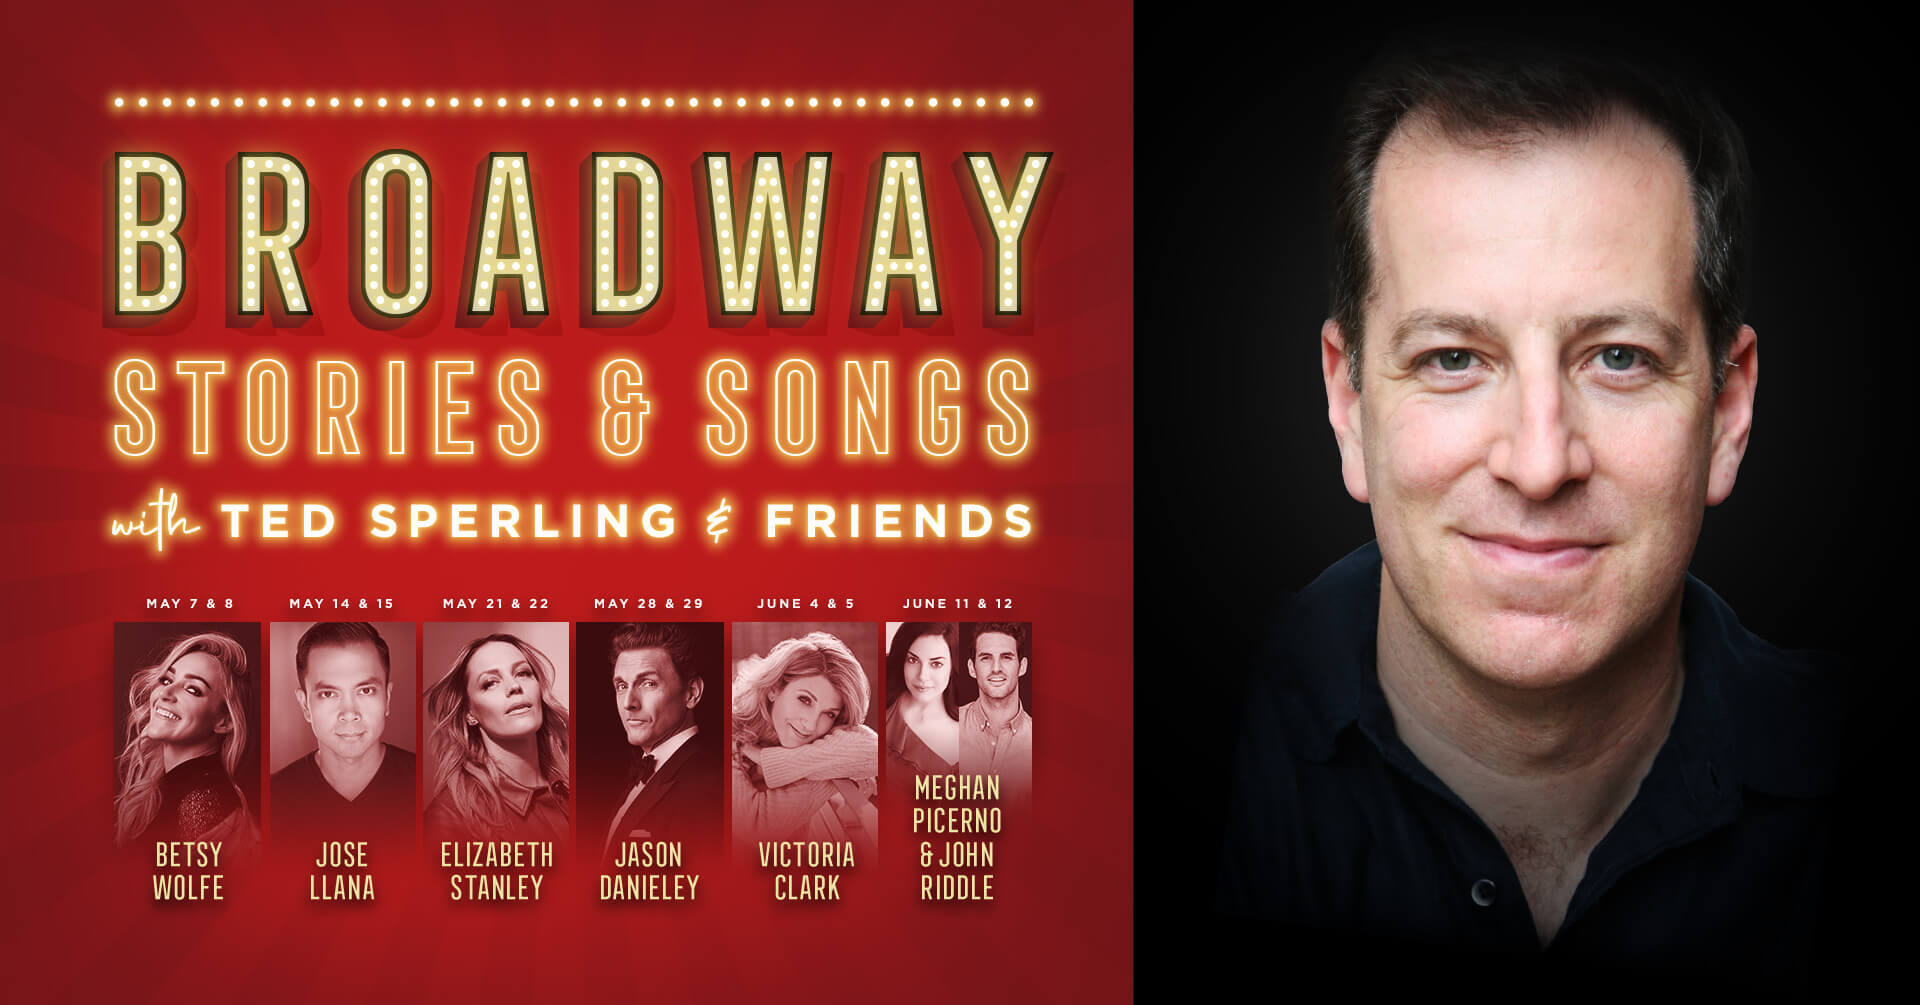 Meghan Picerno & John Riddle: Broadway Stories & Songs with Ted ...